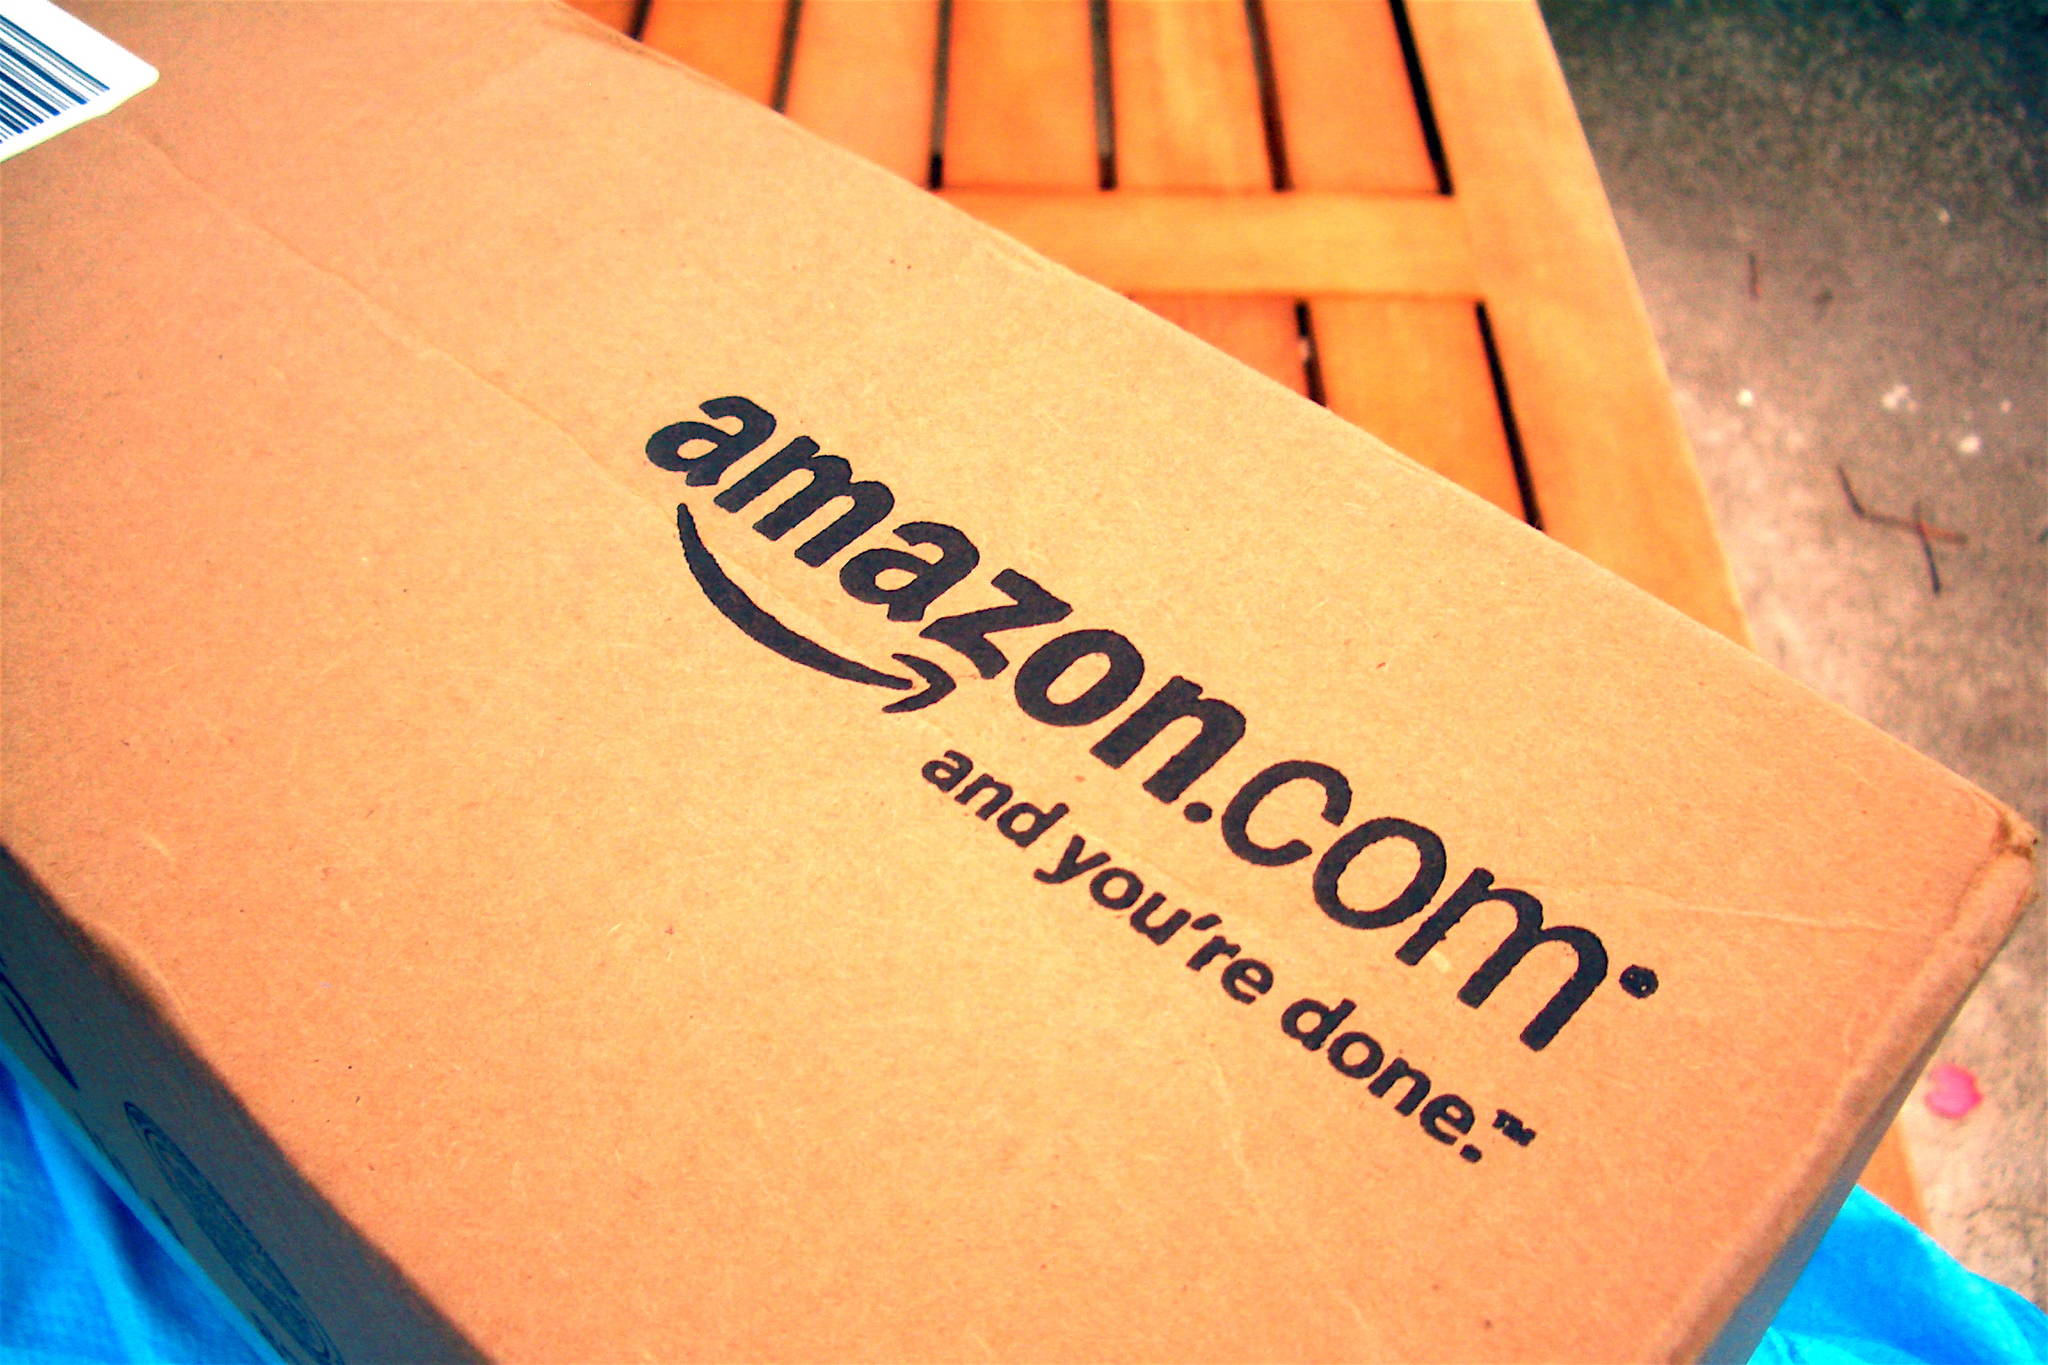 Amazon box. Photo by Mike Seyfang, Flickr Creative Commons